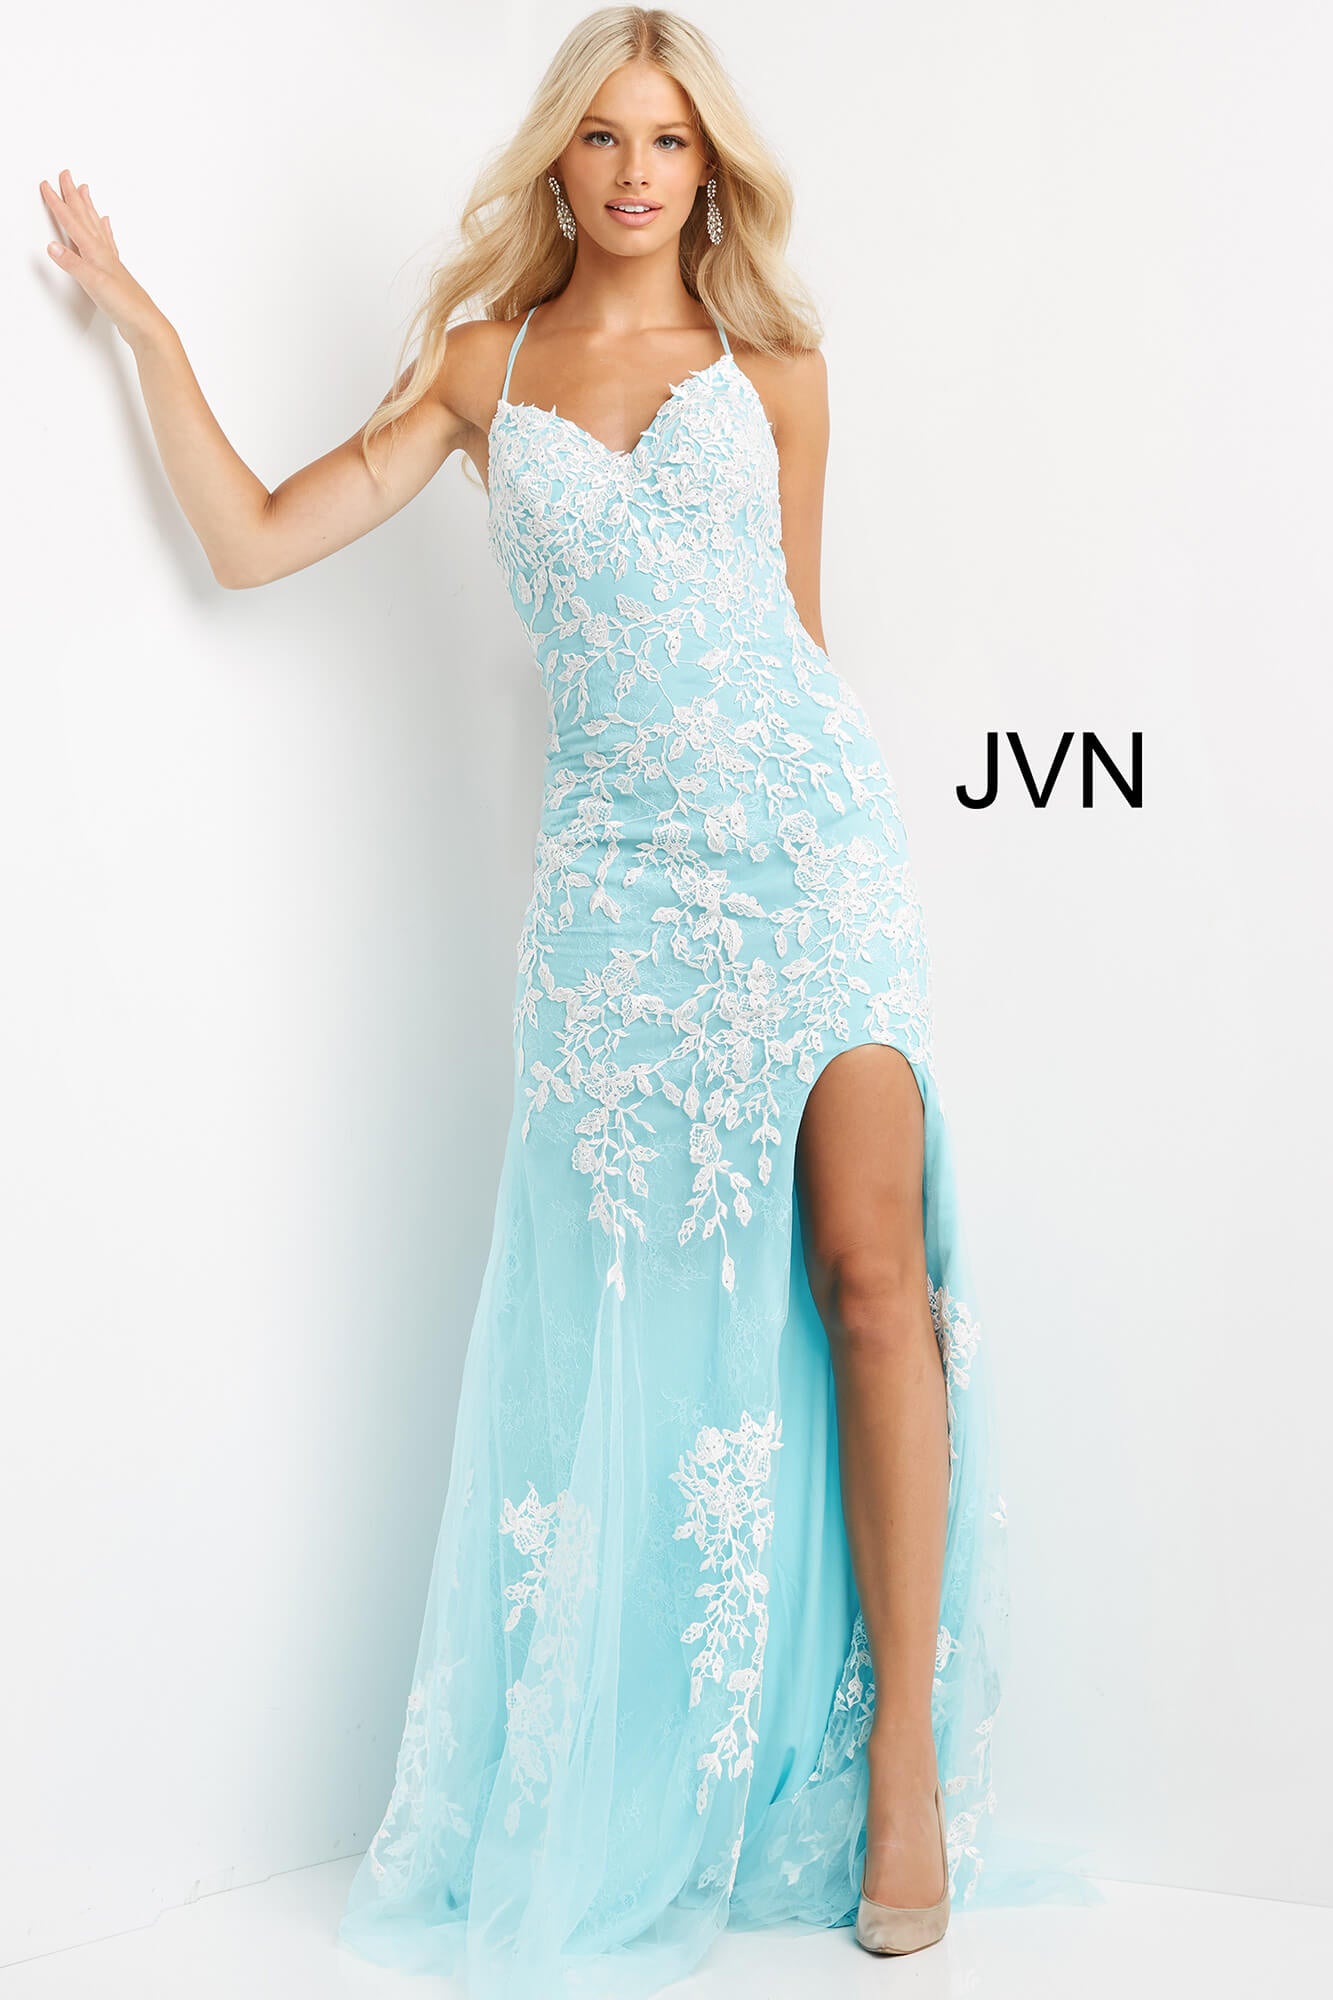 JVN06660-Aqua-White-prom-dress-front-v-neckline-slitJovani JVN06660 - JVN 06660 is a long fitted Lace formal evening gown. This Backless prom dress with a lace up corset back closure features floral lace appliques embellished with crystal rhinestones over a lace layer. Fit & Flare Silhouette with a lush sweeping train and a wide thigh slit.